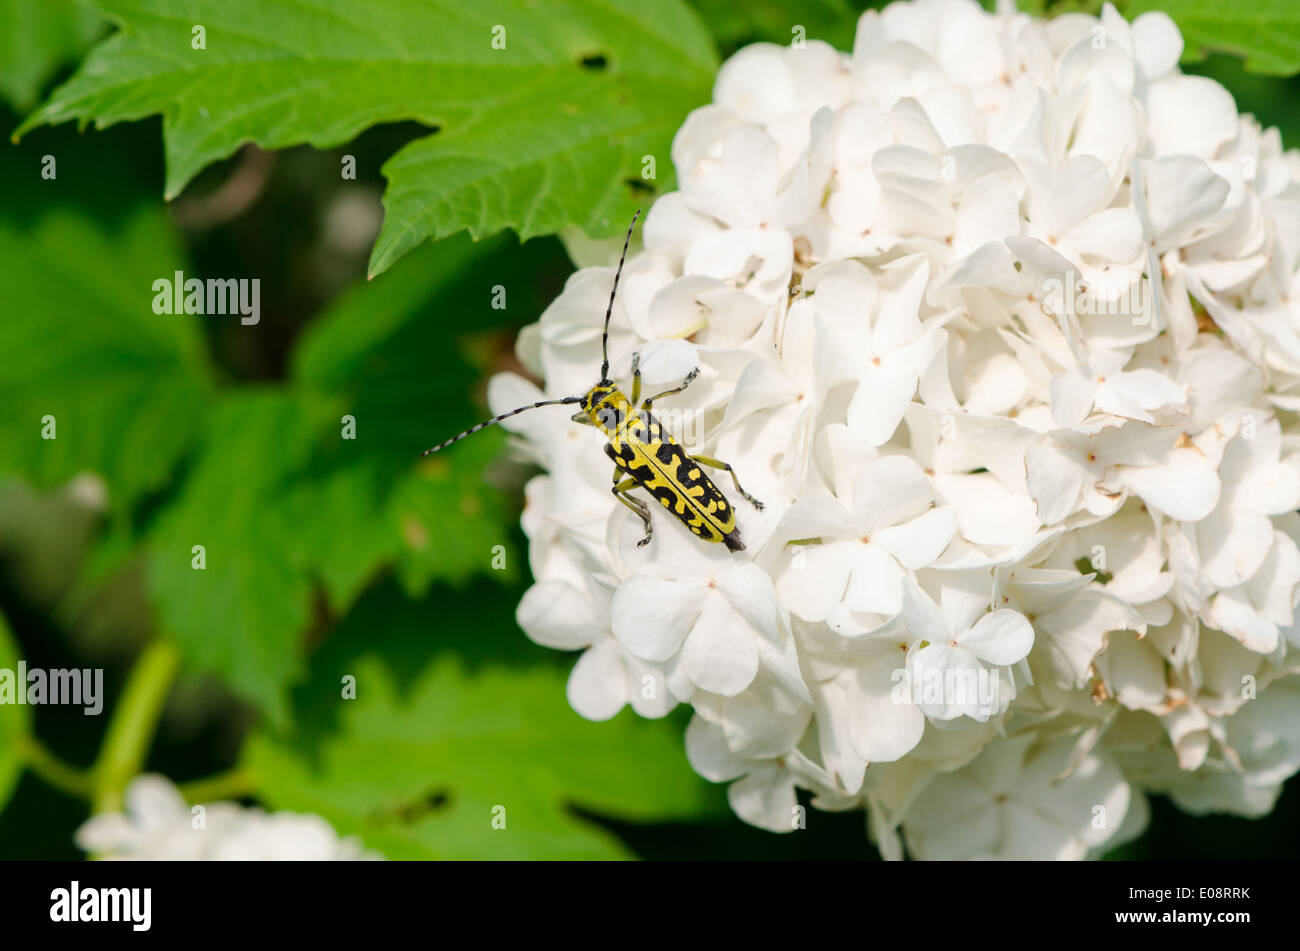 snowball on a white inflorescence downwind crawls small beautiful black and yellow coleopteran beetle with long mustache Stock Photo